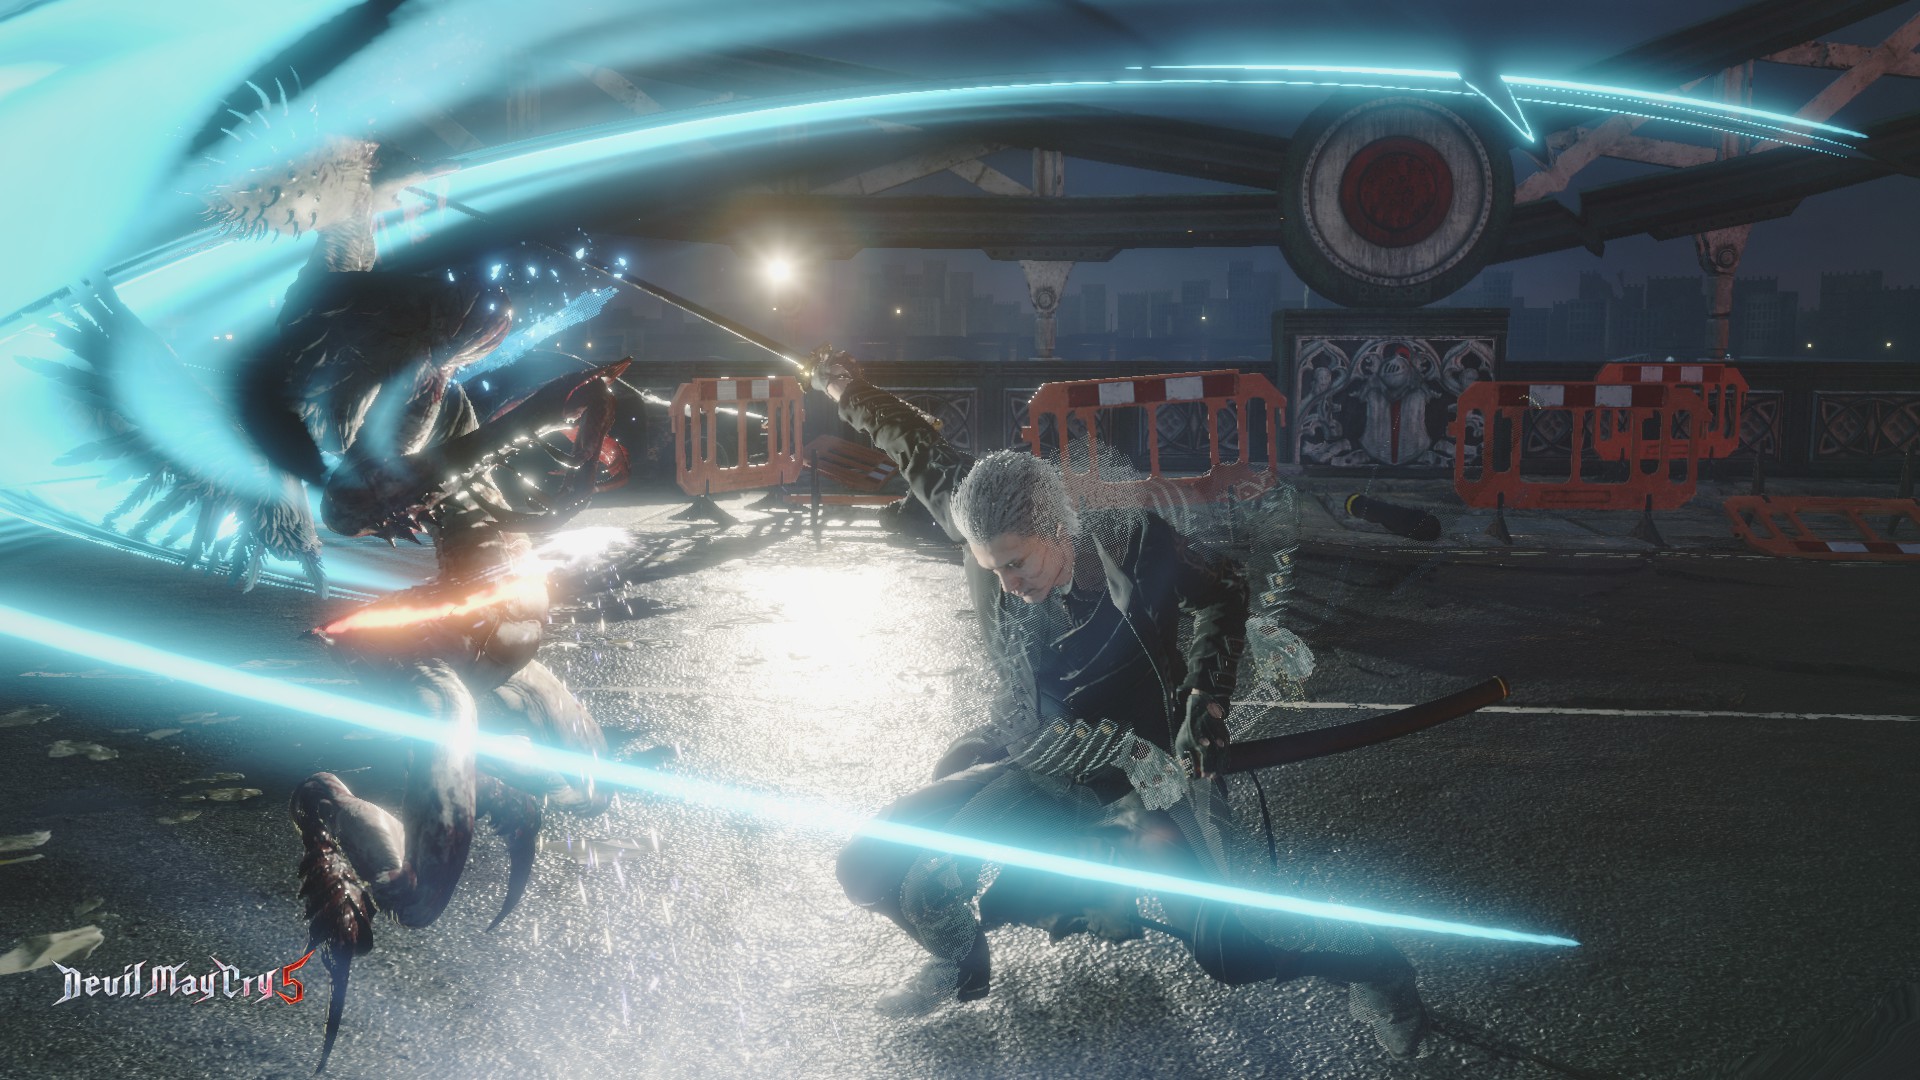 How long is Devil May Cry 5 - Vergil?